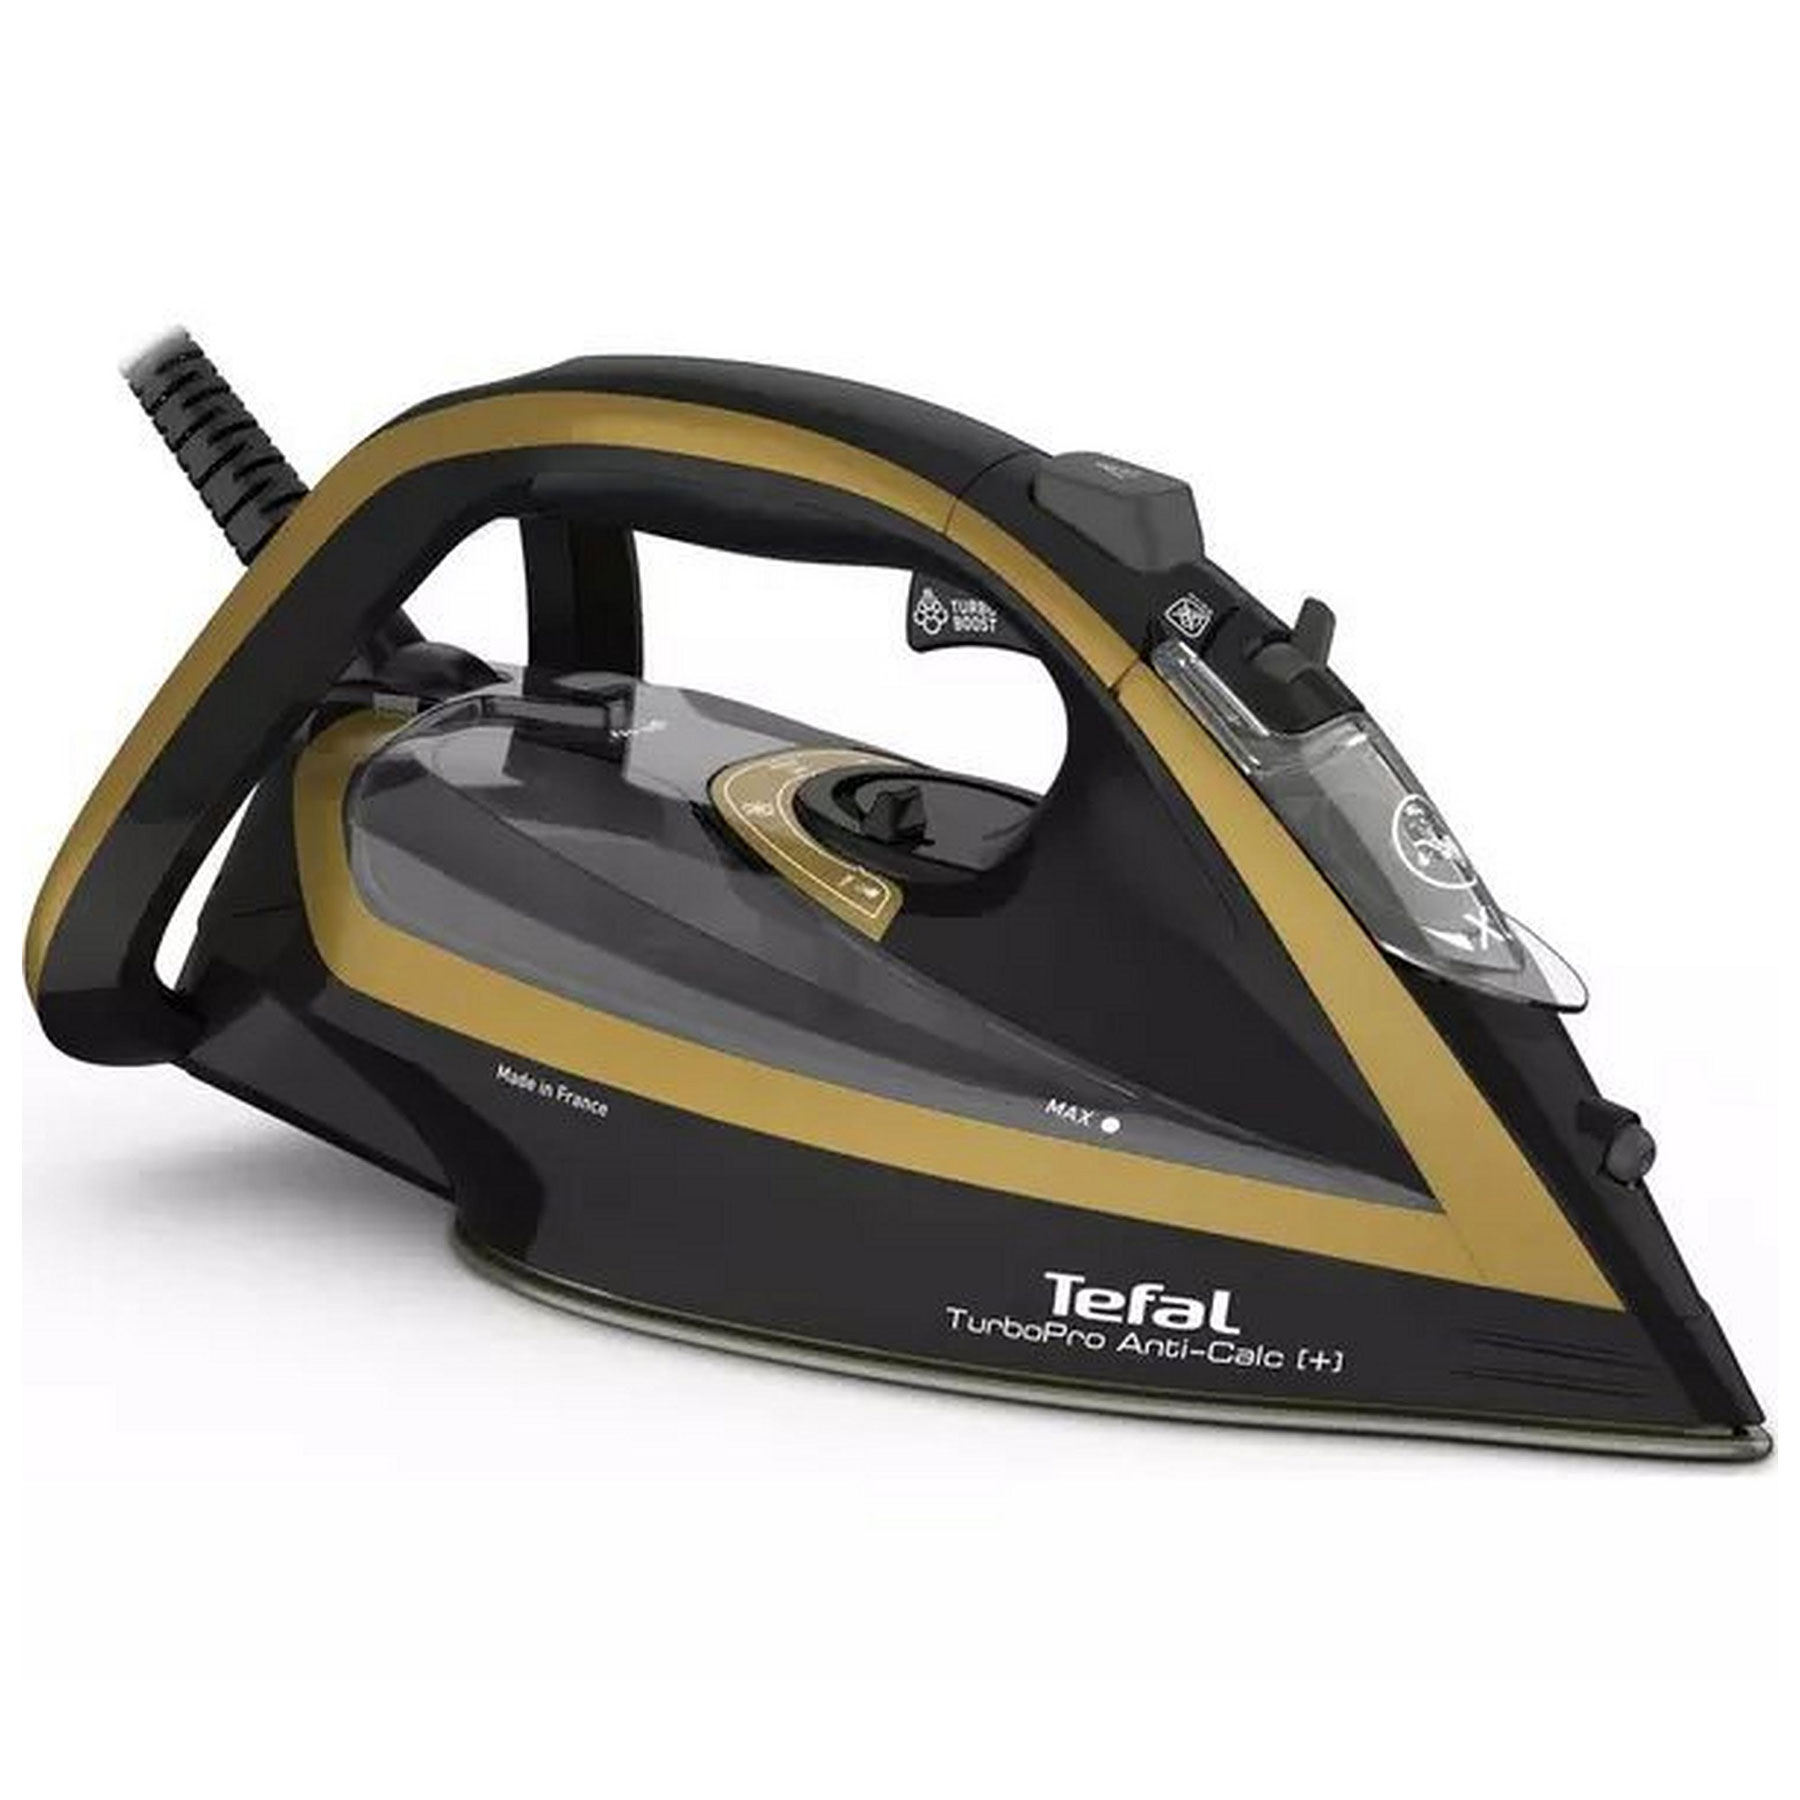 Tefal FV5696G0 Ultimate Turbo Pro Steam Iron in Black and Gold 3000W